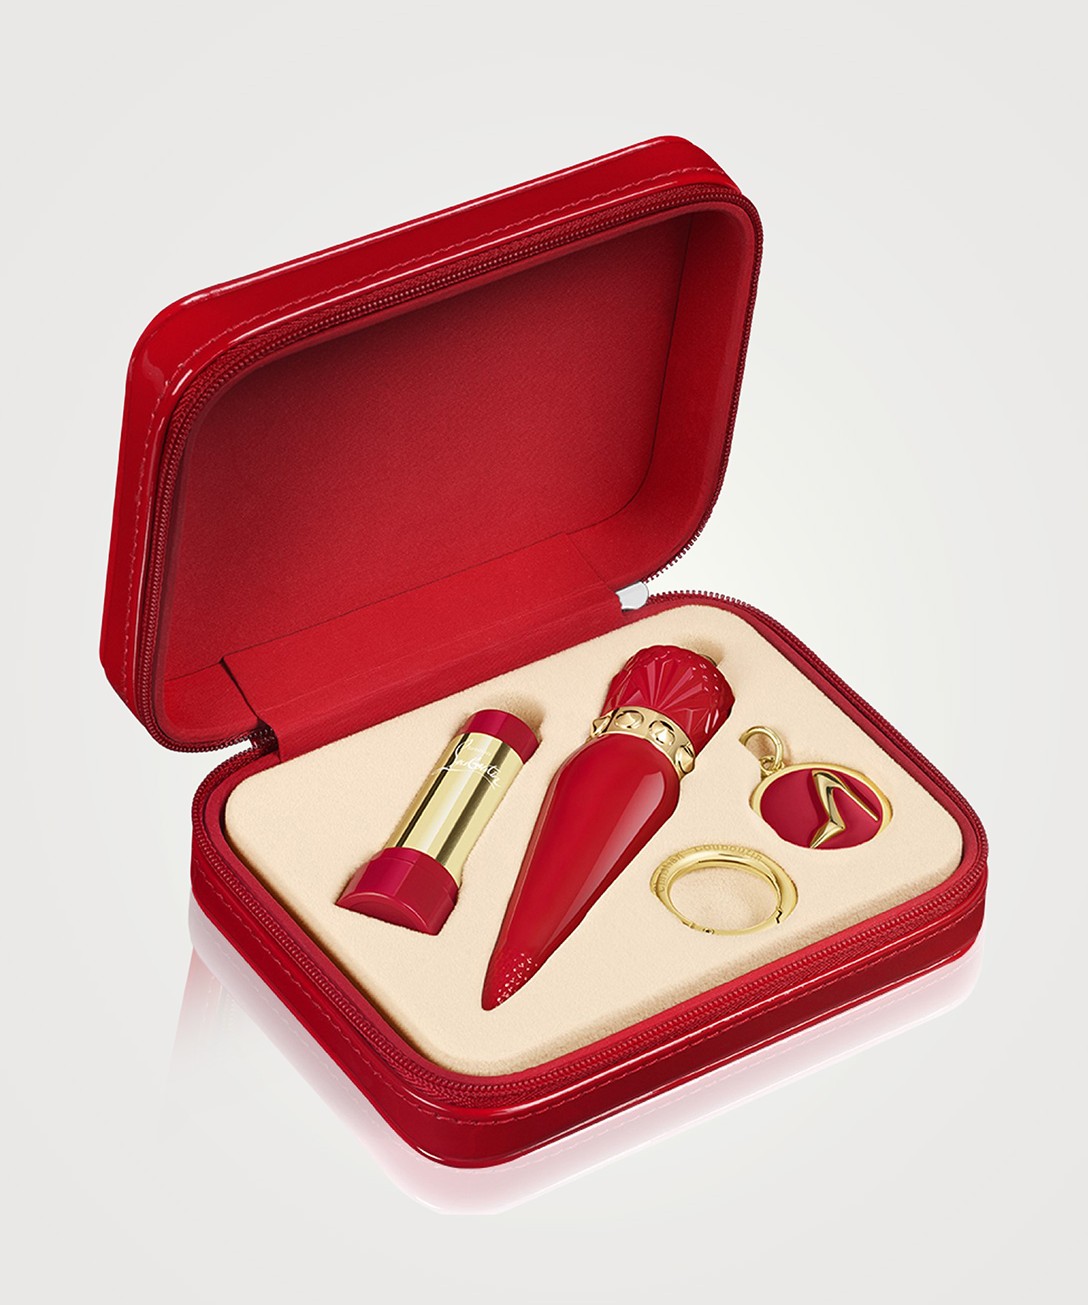 A red gift set from Louboutin Beauty with a lipstick, nail polish and keychain featuring a gold stiletto.